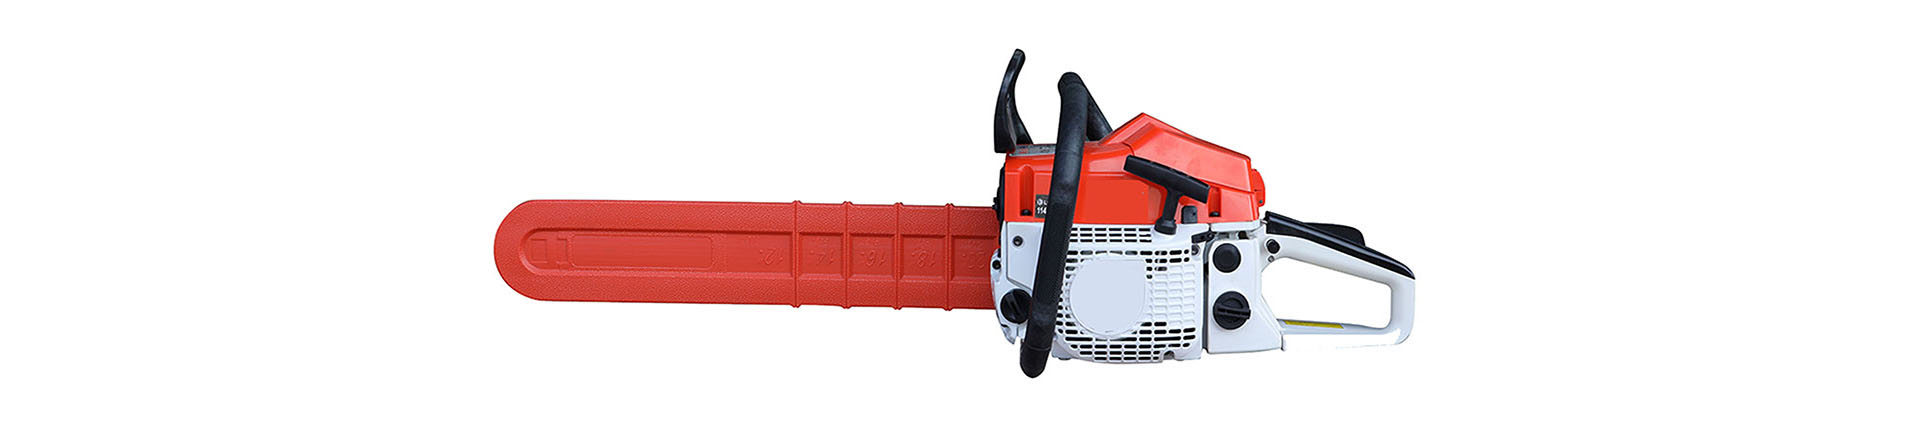  58cc large power chain saw with great price